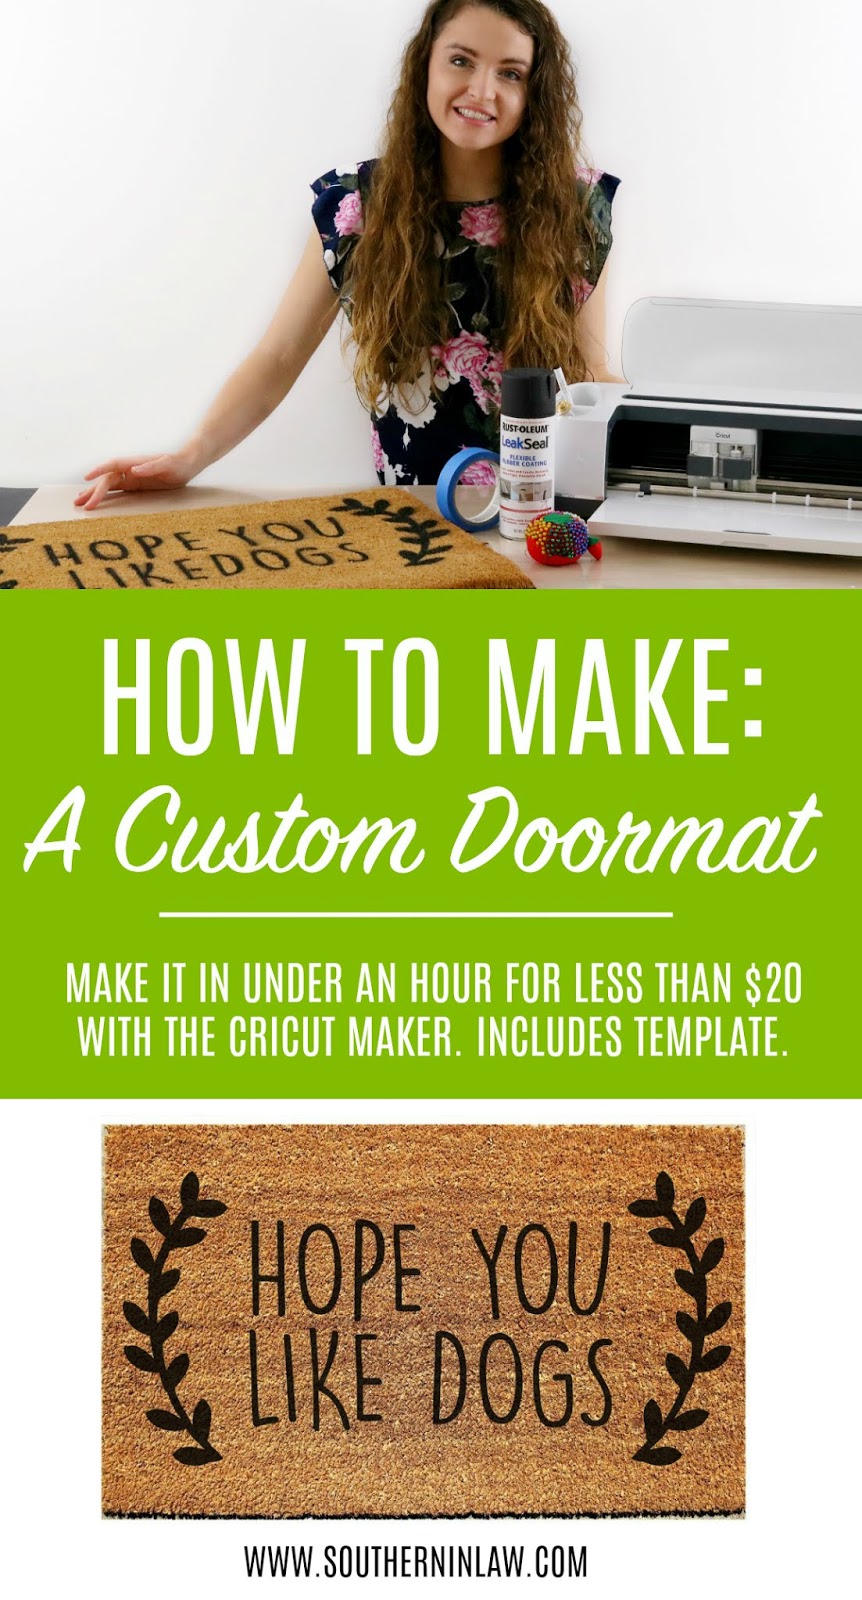 How to Make a Hand Painted Doormat Tutorial - Simply Made Fun